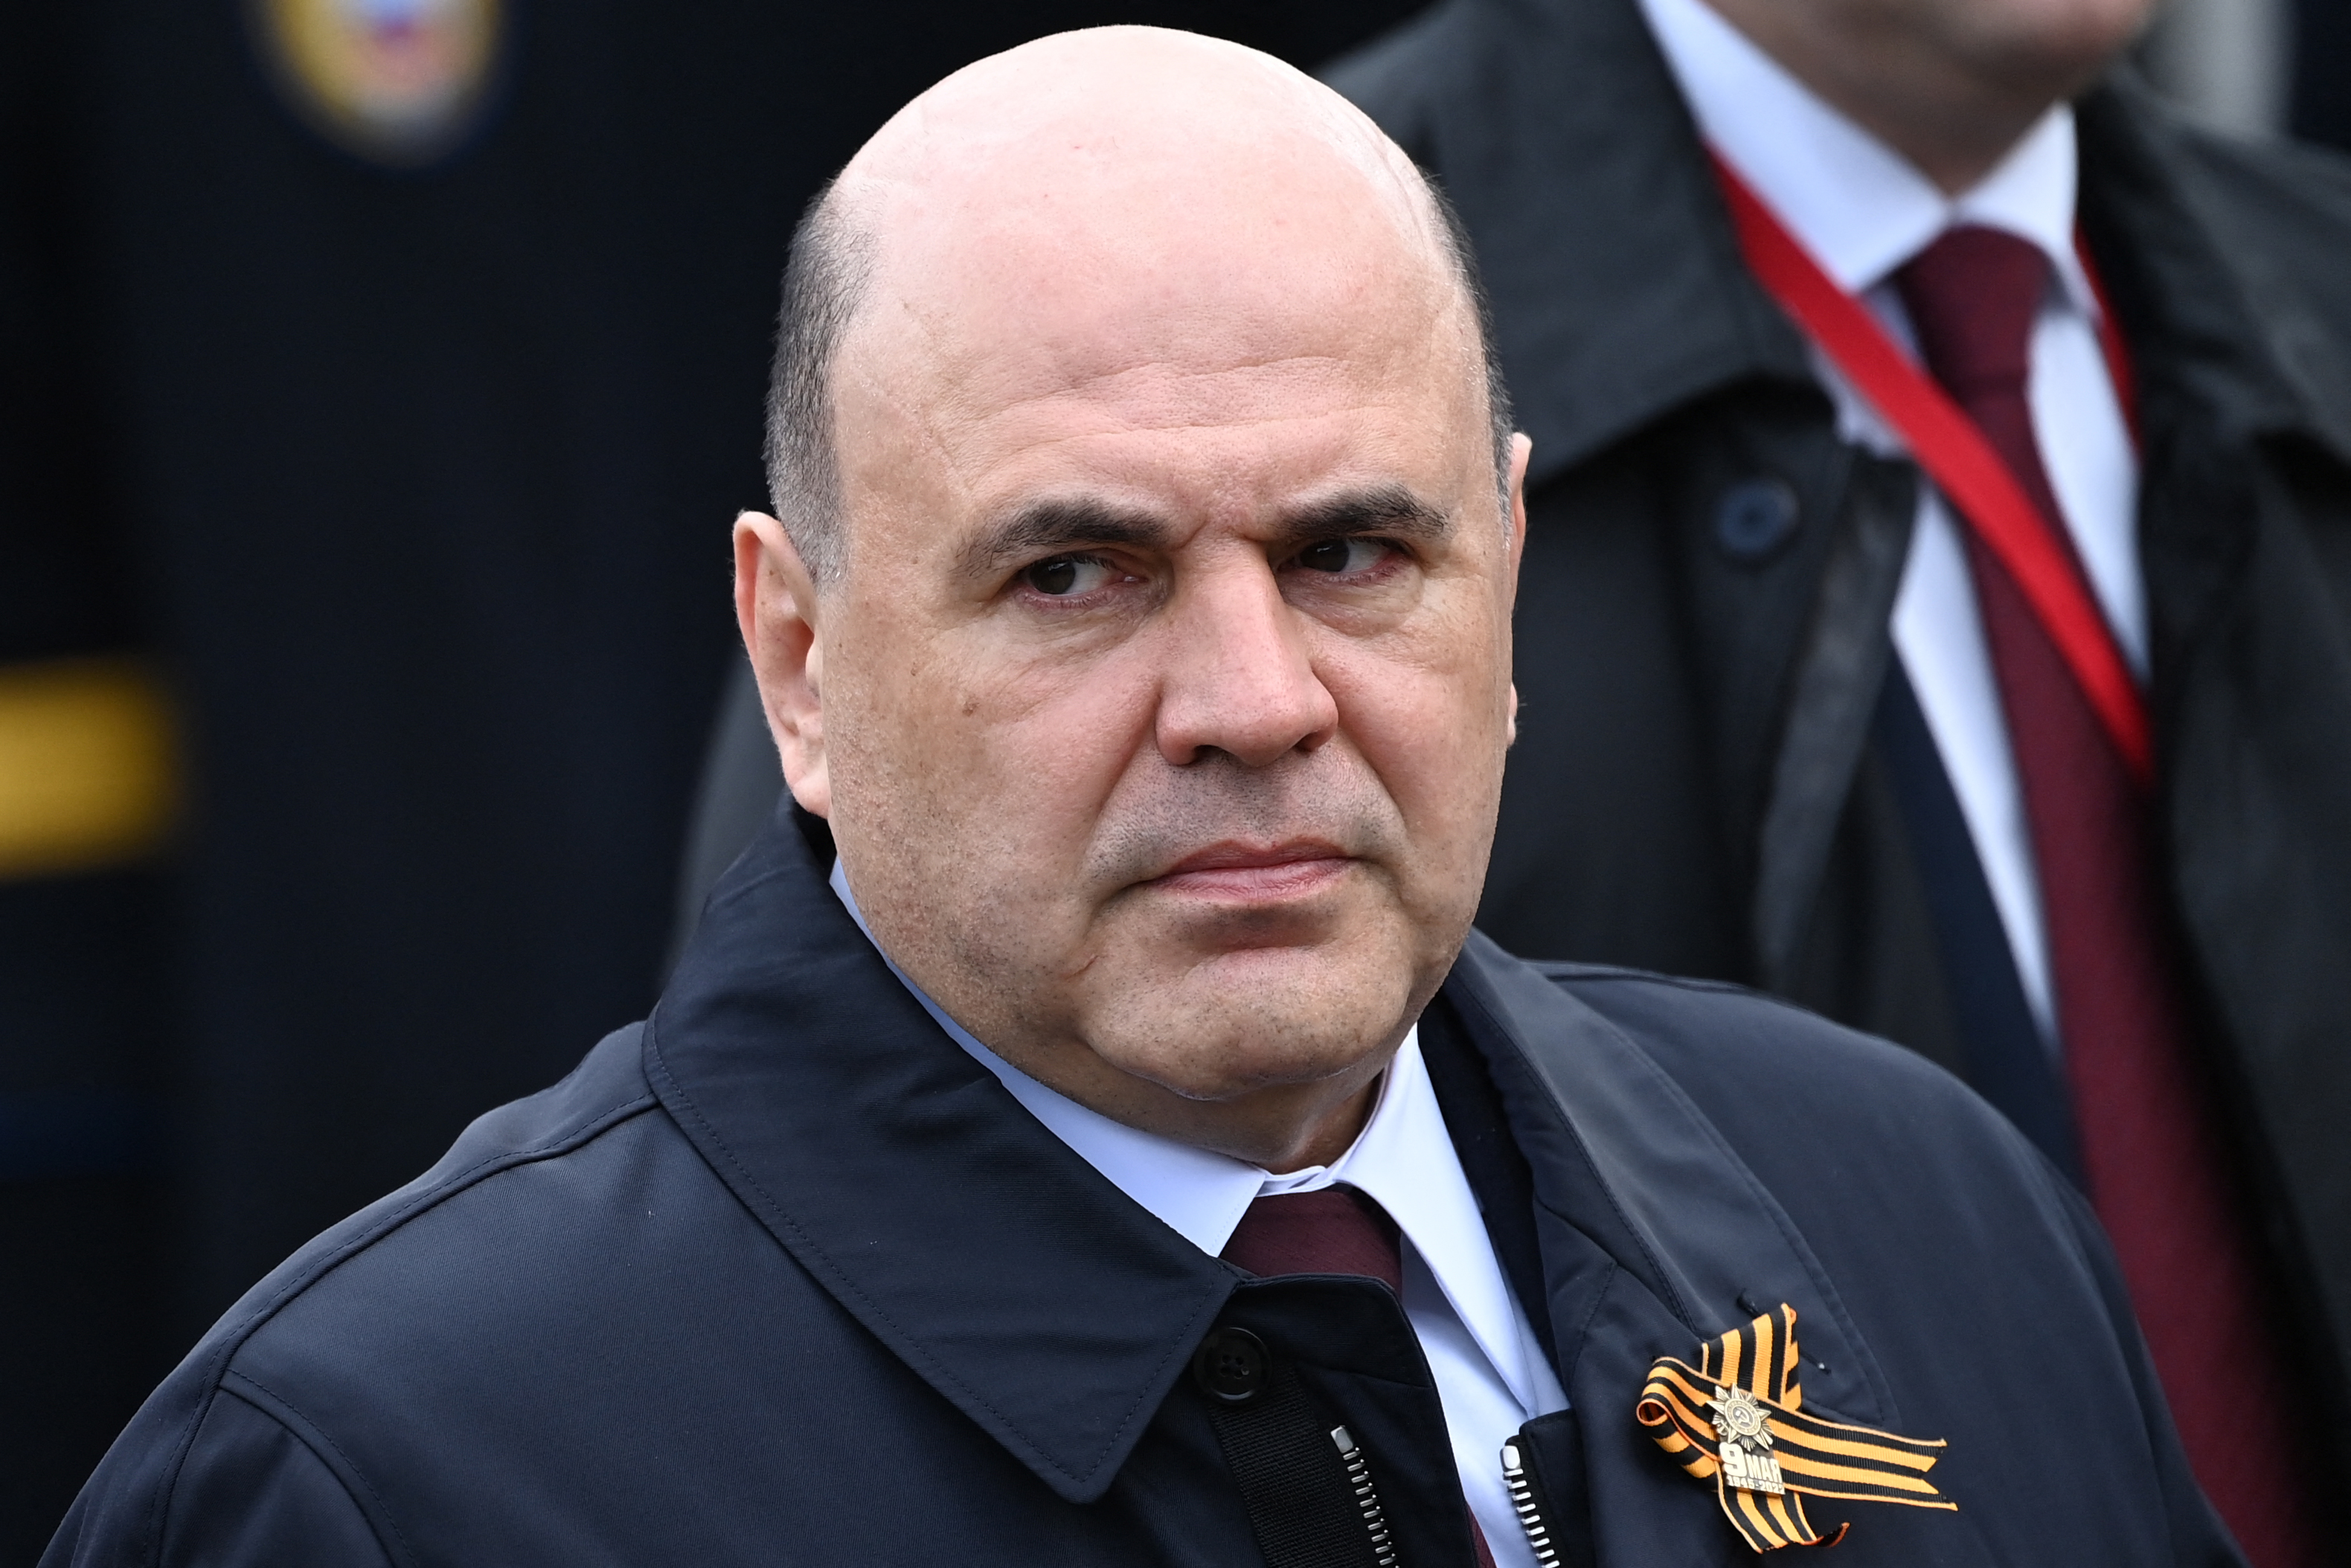 Russian Prime Minister Mikhail Mishustin, pictured here at the Victory Day military parade at Red Square in Moscow on May 9, hopes Russia will be considered by the Bureau International des Expositions as a future host.